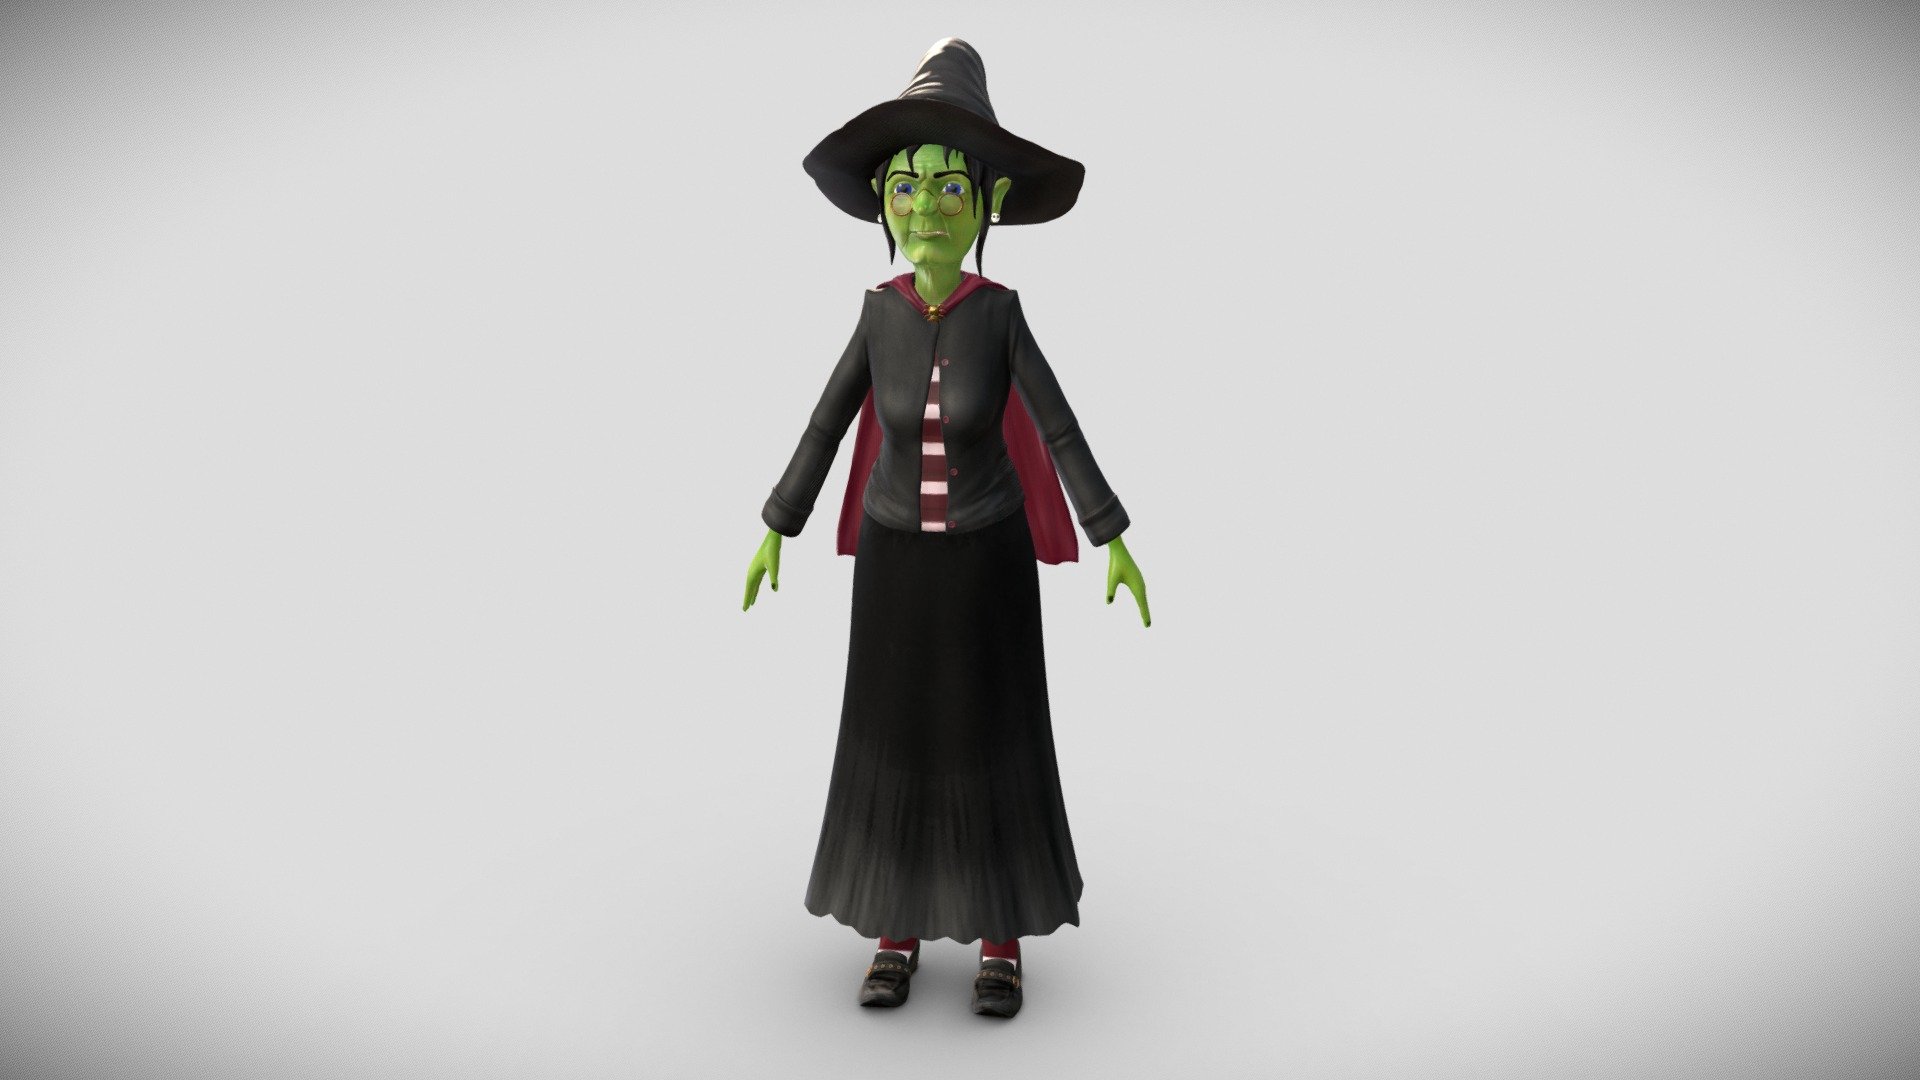 A cartoon witch with textures.

Normal map is 4096. Color/Specular Maps are 2048.

Collada, FBX, and OBJ formats included 3d model